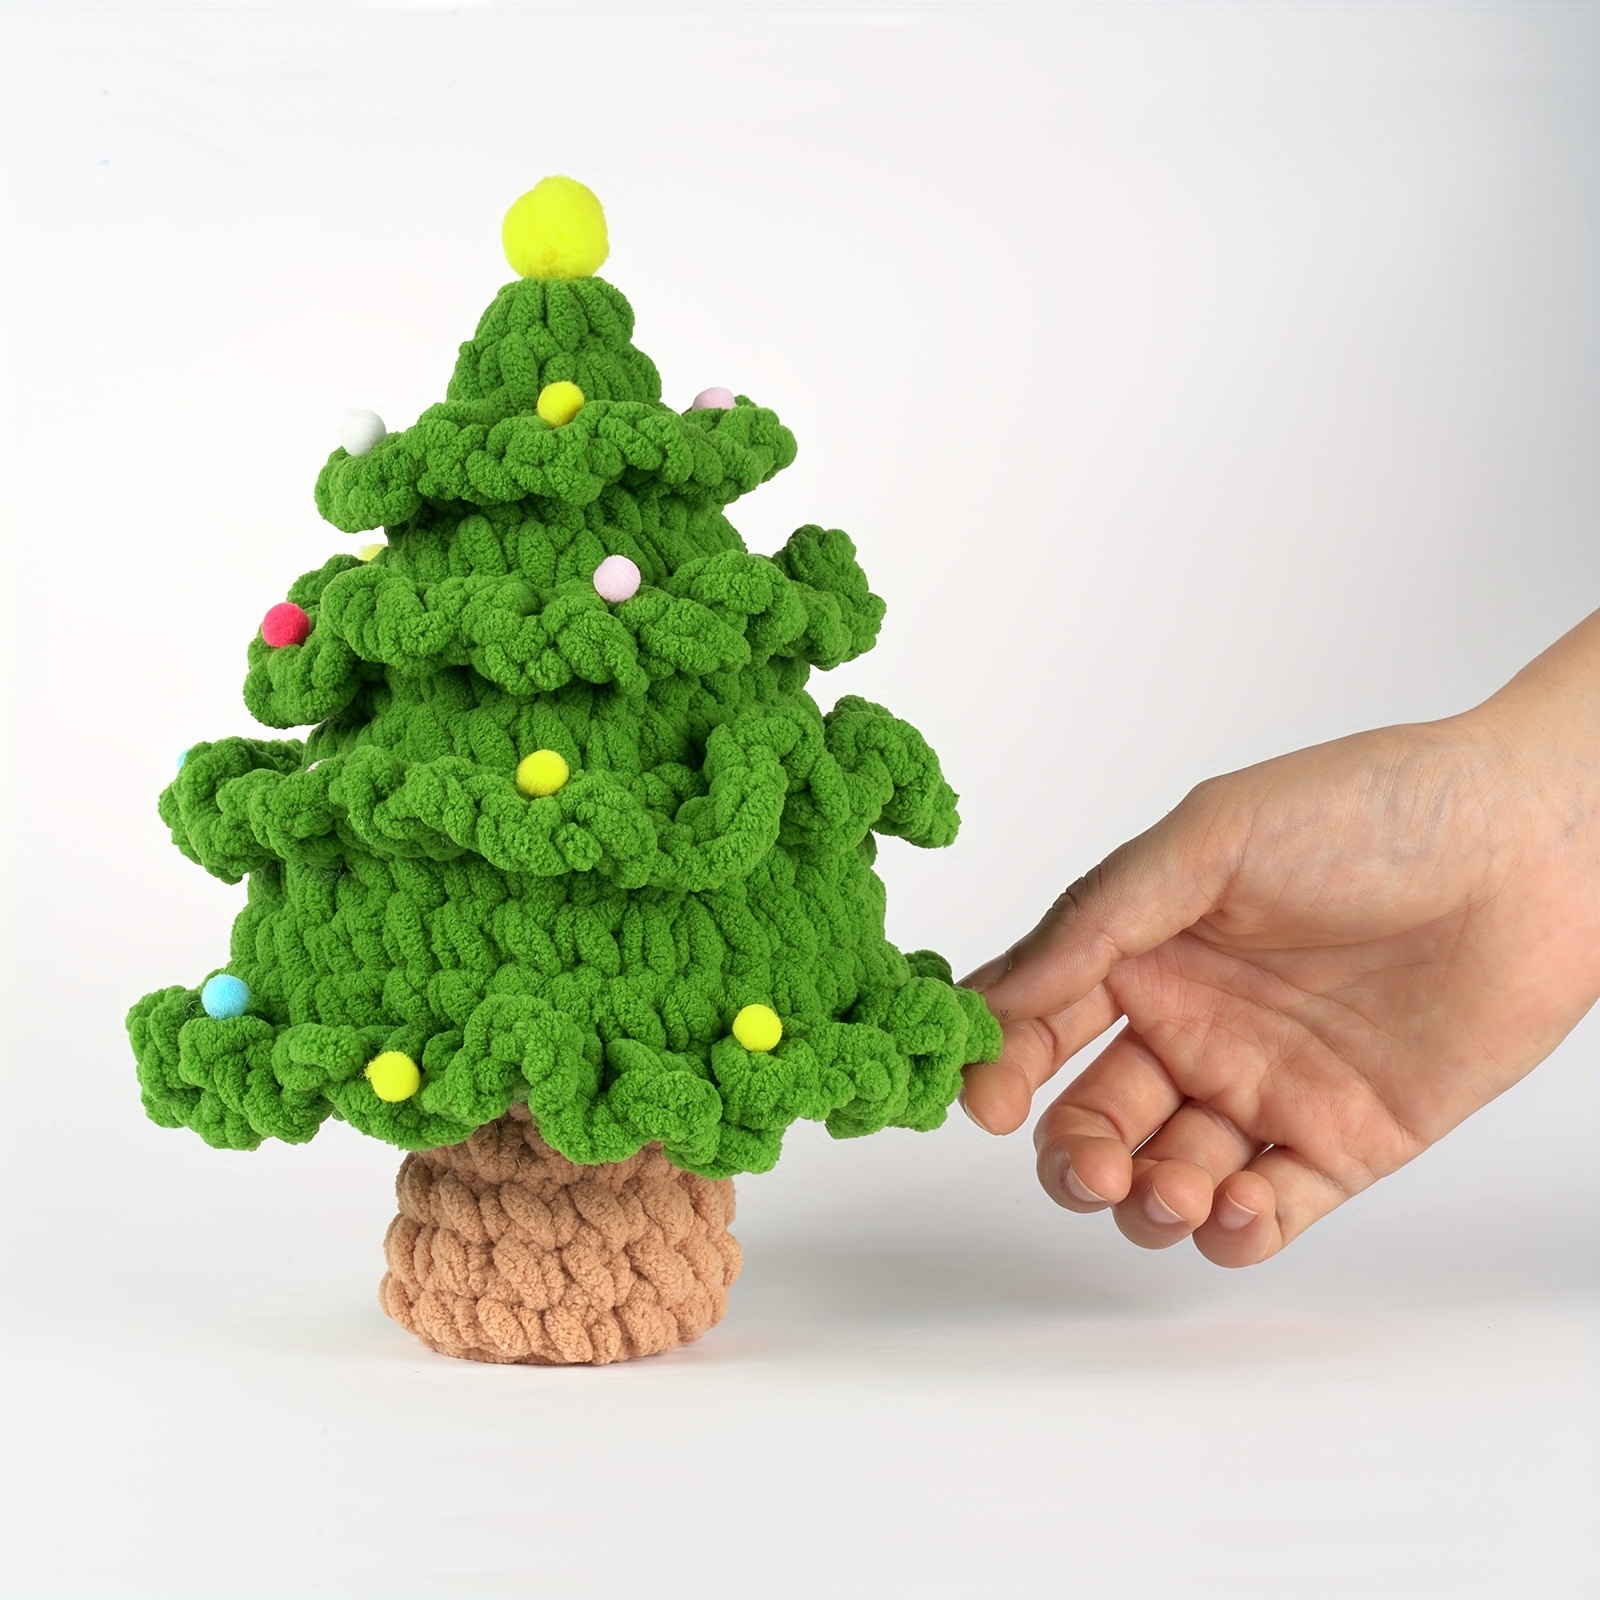 Handmade Cotton Rope Woven Christmas Tree Material Package - Temu